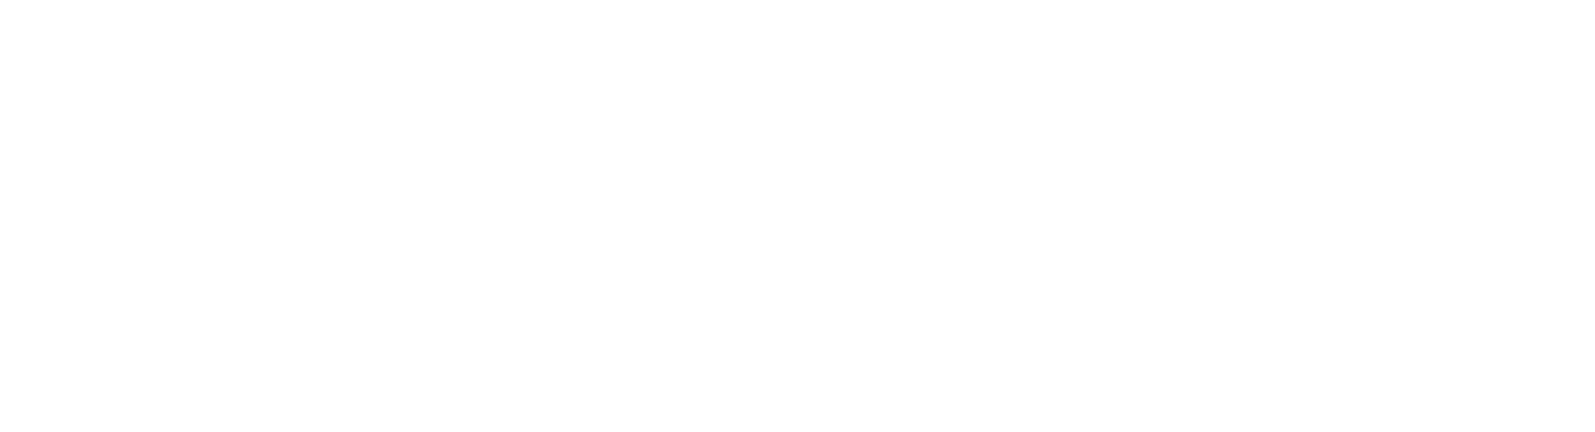 Jardine Cycle & Carriage logo large for dark backgrounds (transparent PNG)